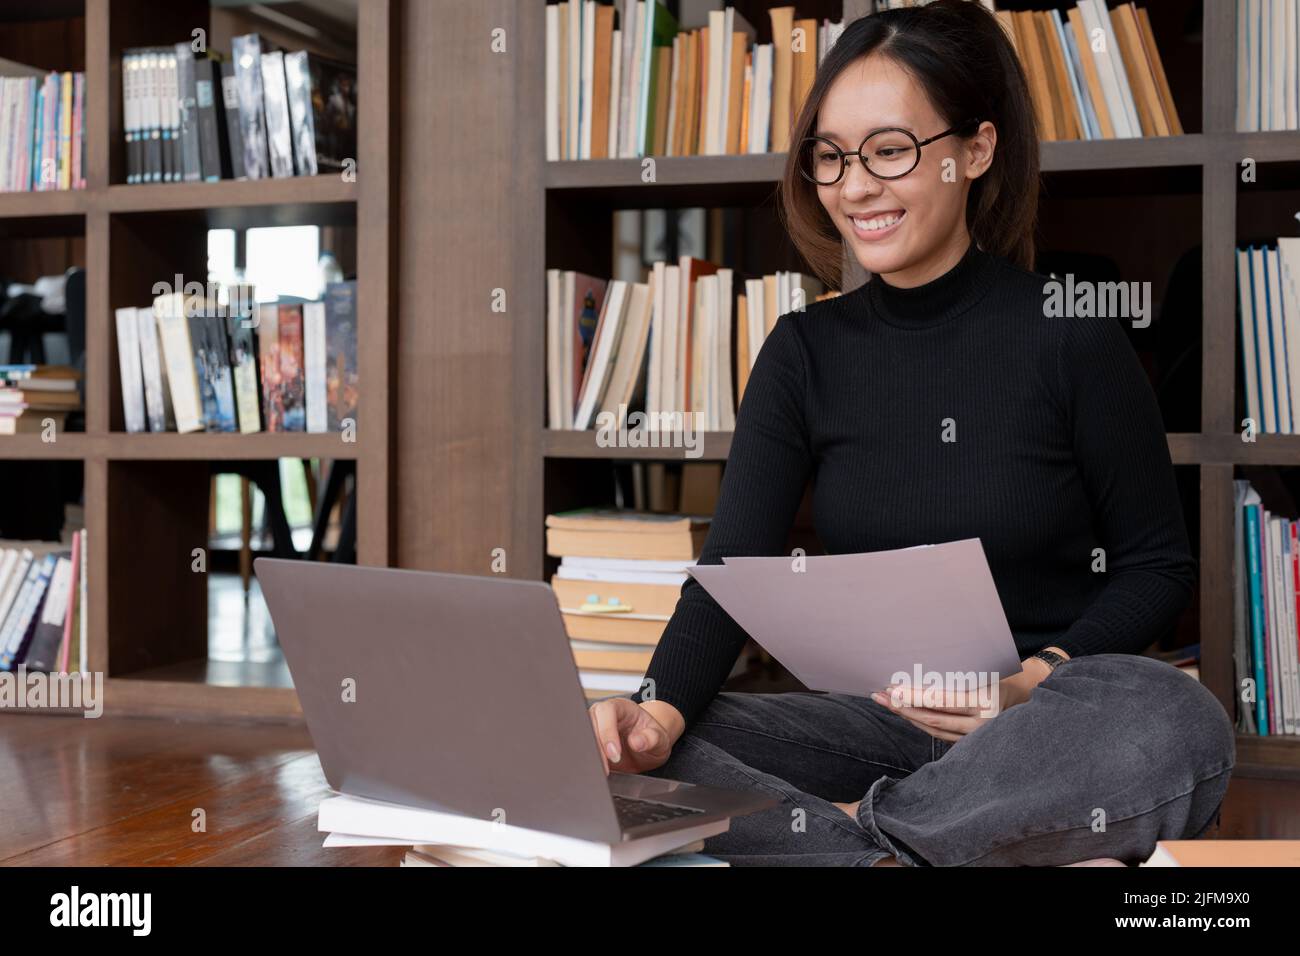 University library: beautiful asian woman uses laptop, Study for class assignment. focused Students Learning, studying for College exams. Stock Photo